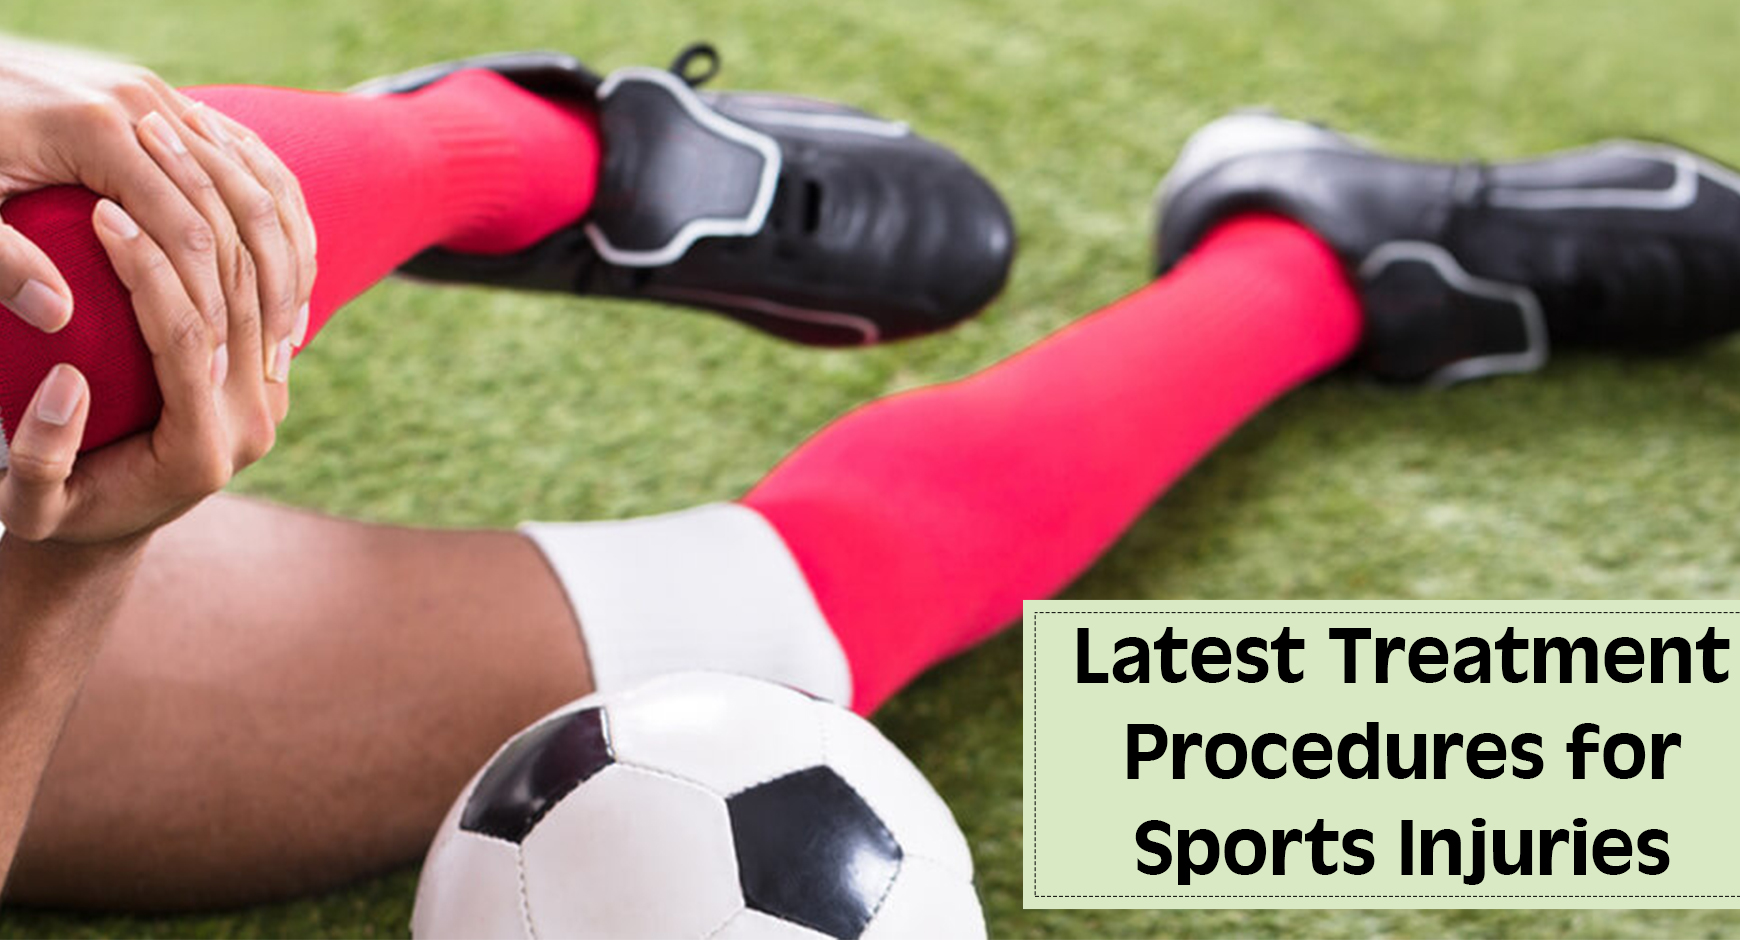 Latest treatment procedures for sports injuries